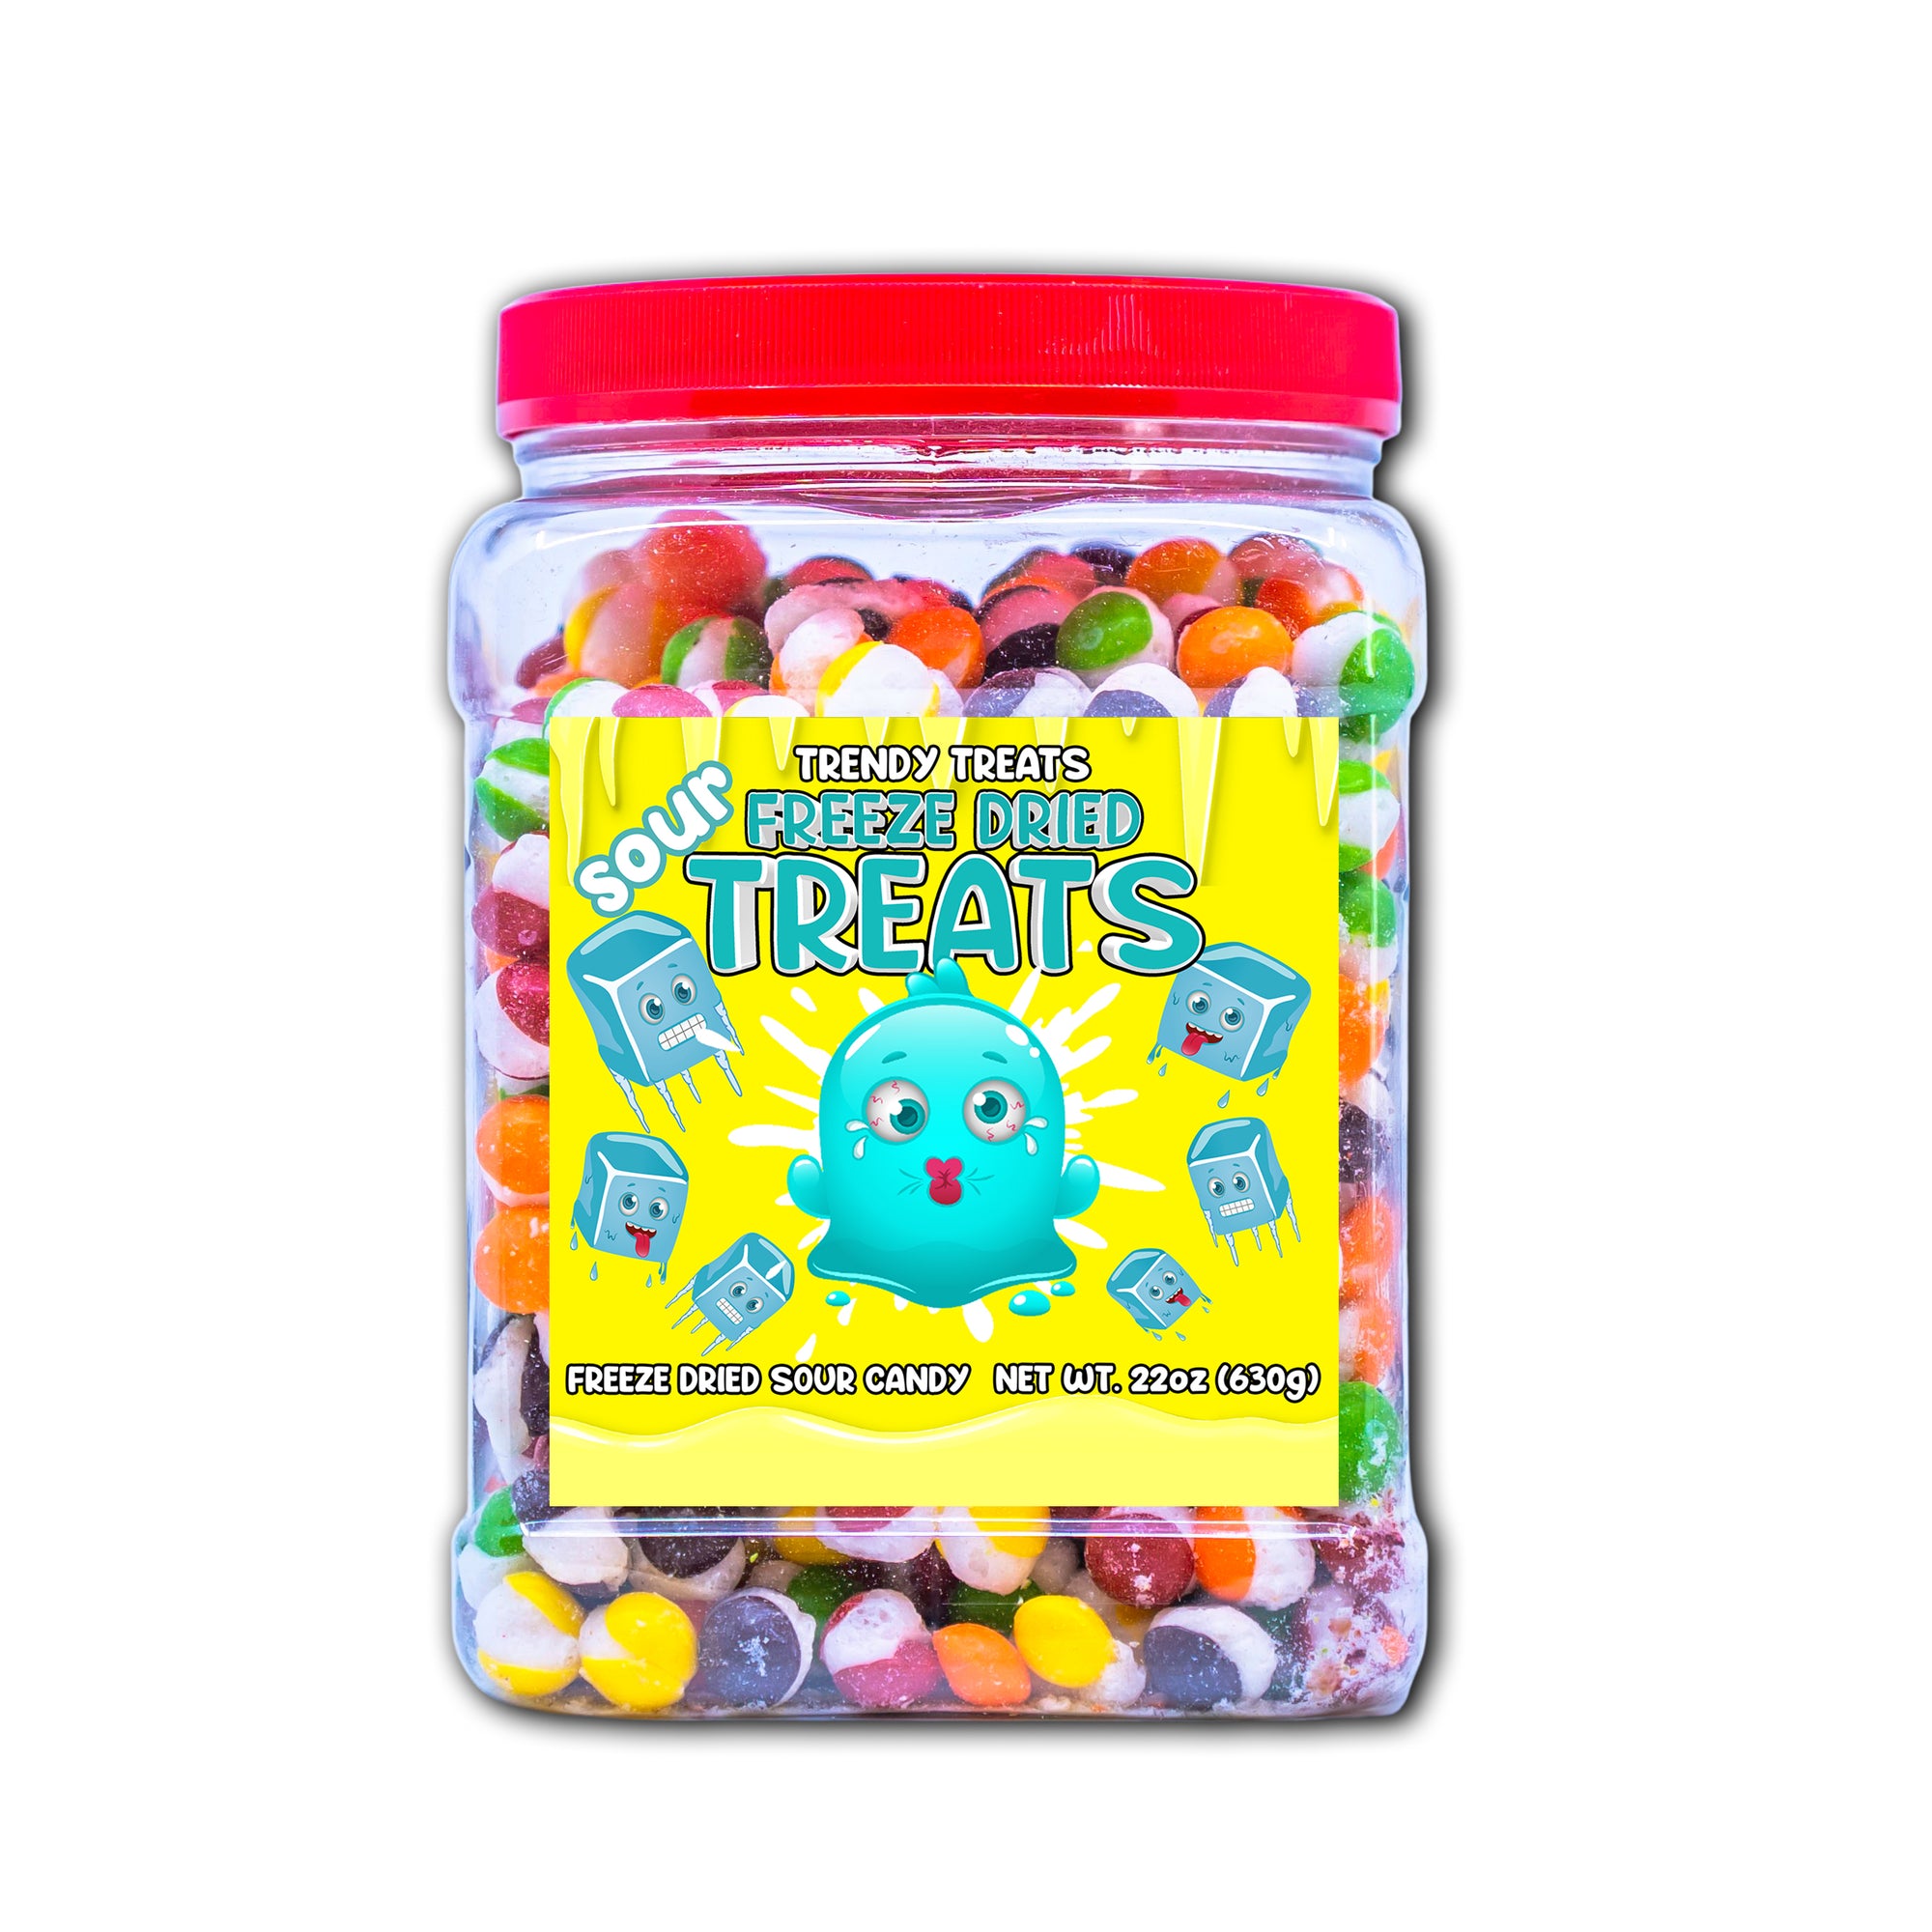 Freeze Dried Sour Rainbow Candy